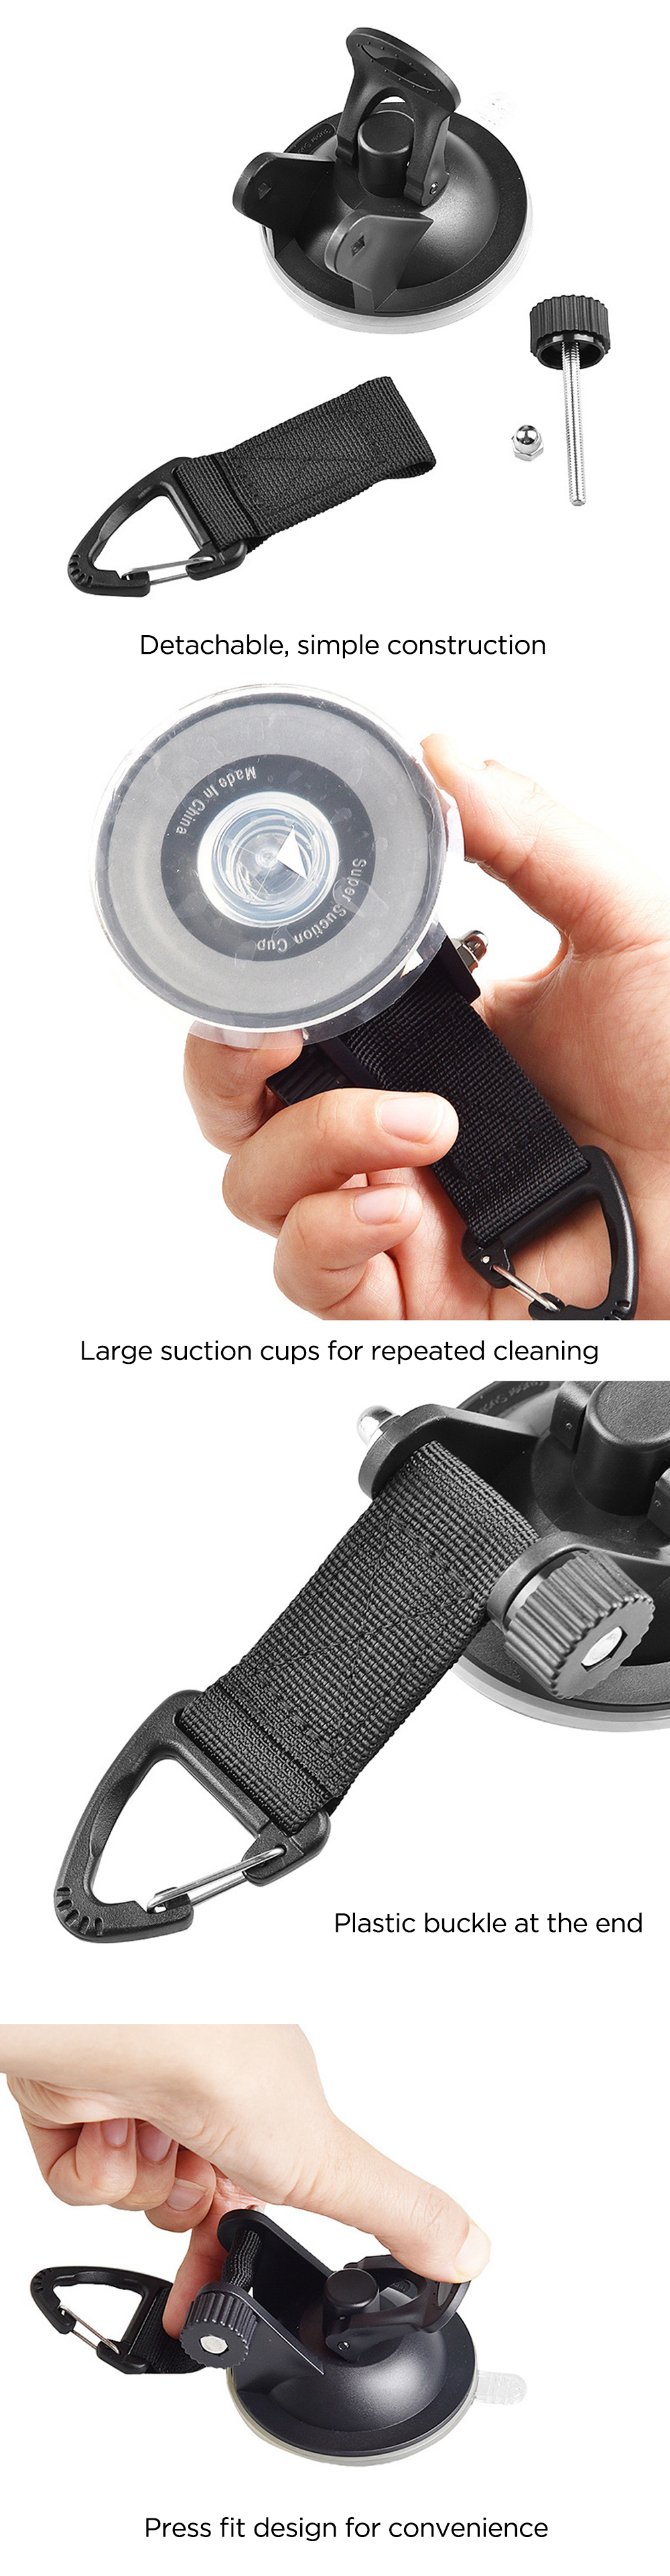 IPReereg-2Pcs-Car-Tent-Fixing-Buckle-Suction-Cup-Securing-Hook-Car-Window-Glass-Suction-Outdoor-Trav-1860795-2